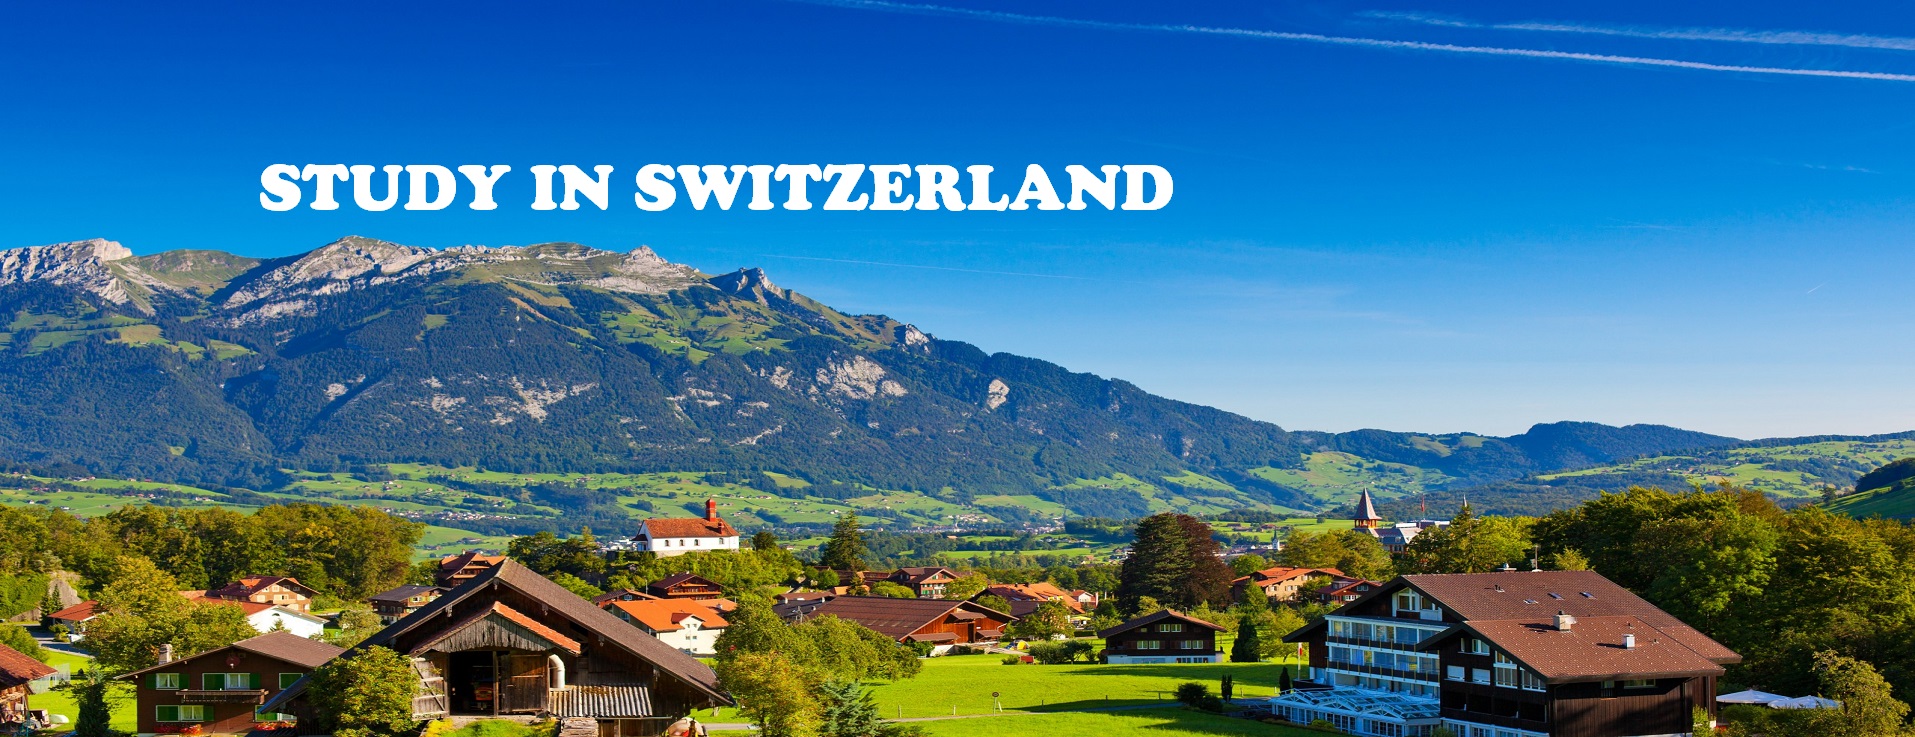 study in Switzerland for Indian students | study in Switzerland cost | Cost of Study in Switzerland | Education Costs for Studying Abroad in Switzerland | studying and working in Switzerland